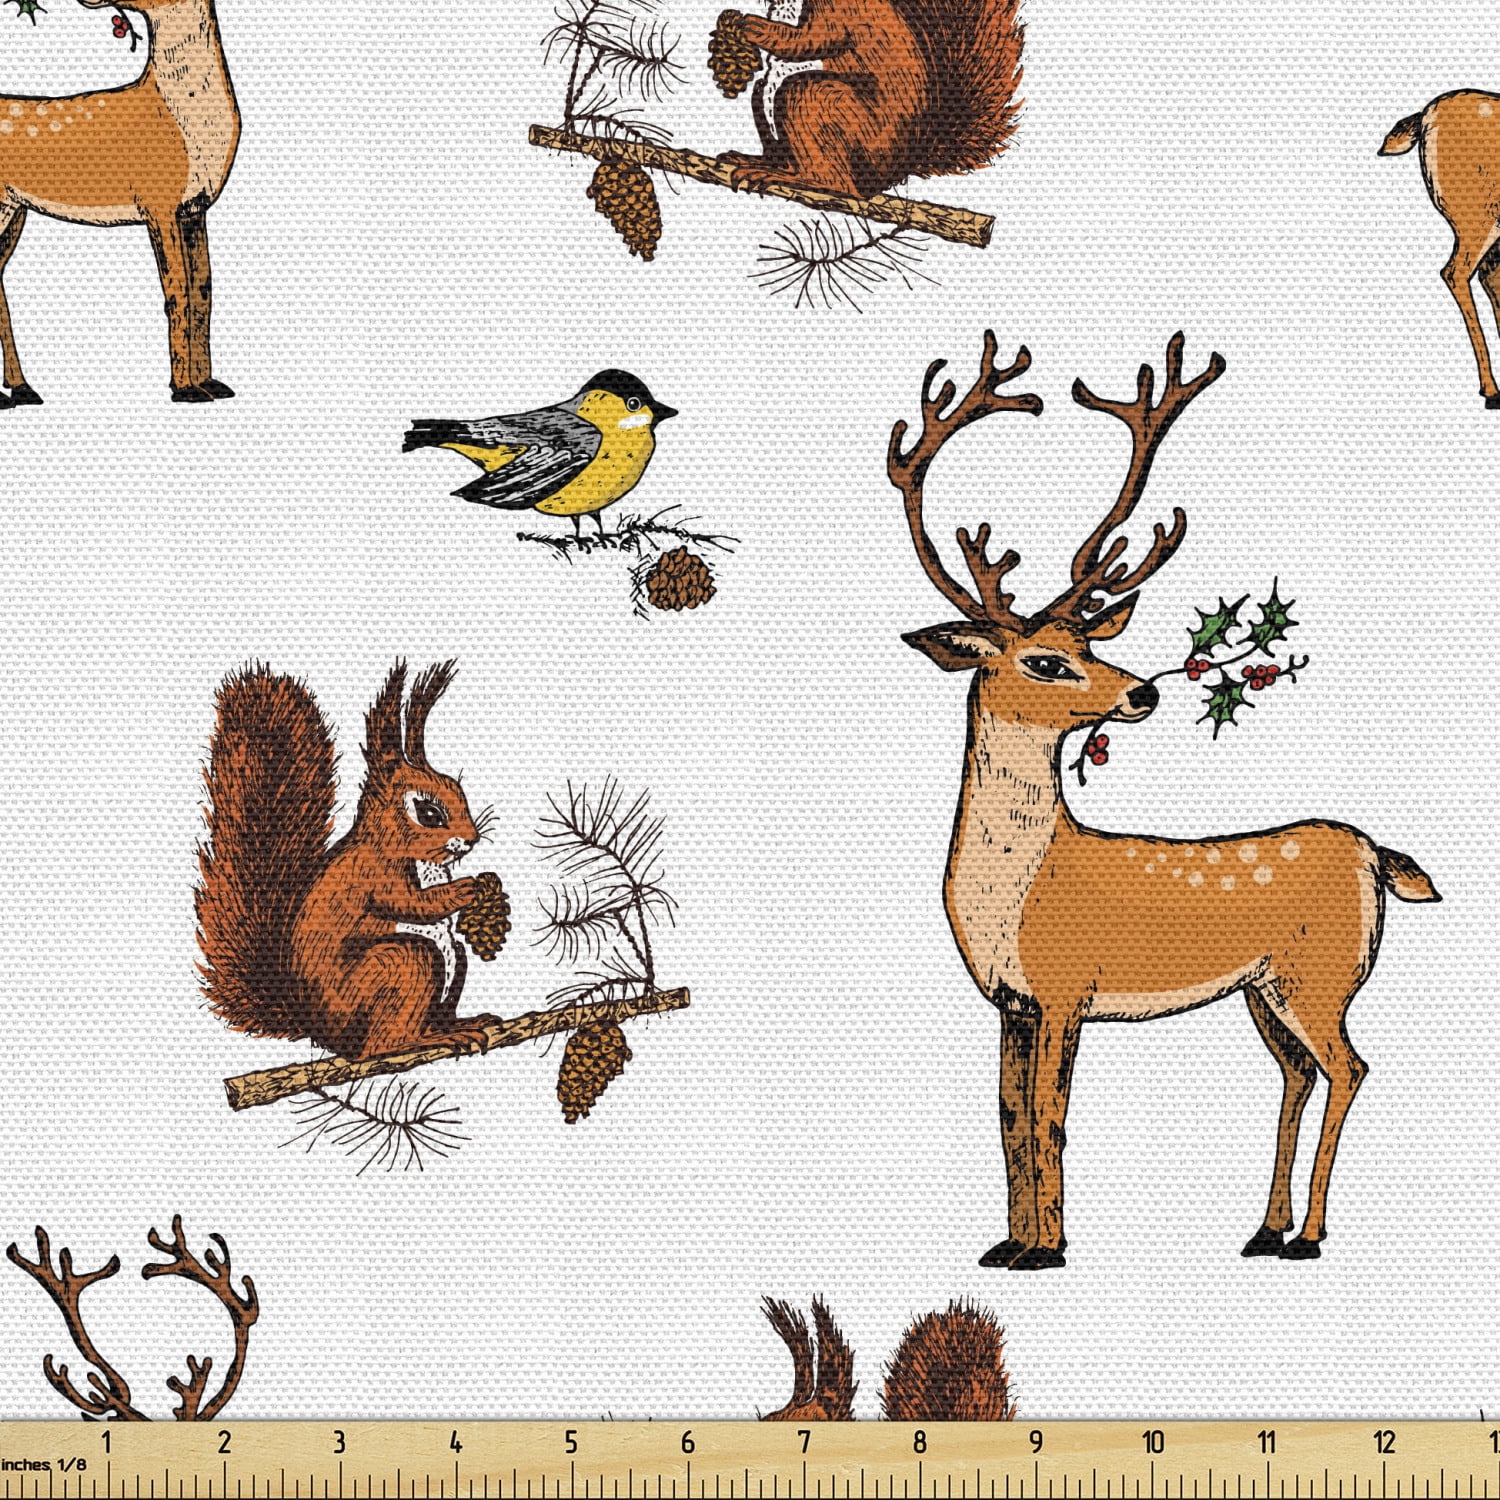 Running Foxes Red Christmas Fox Winter Snowflake Holiday Animal Tan Woodland by Spoonflower